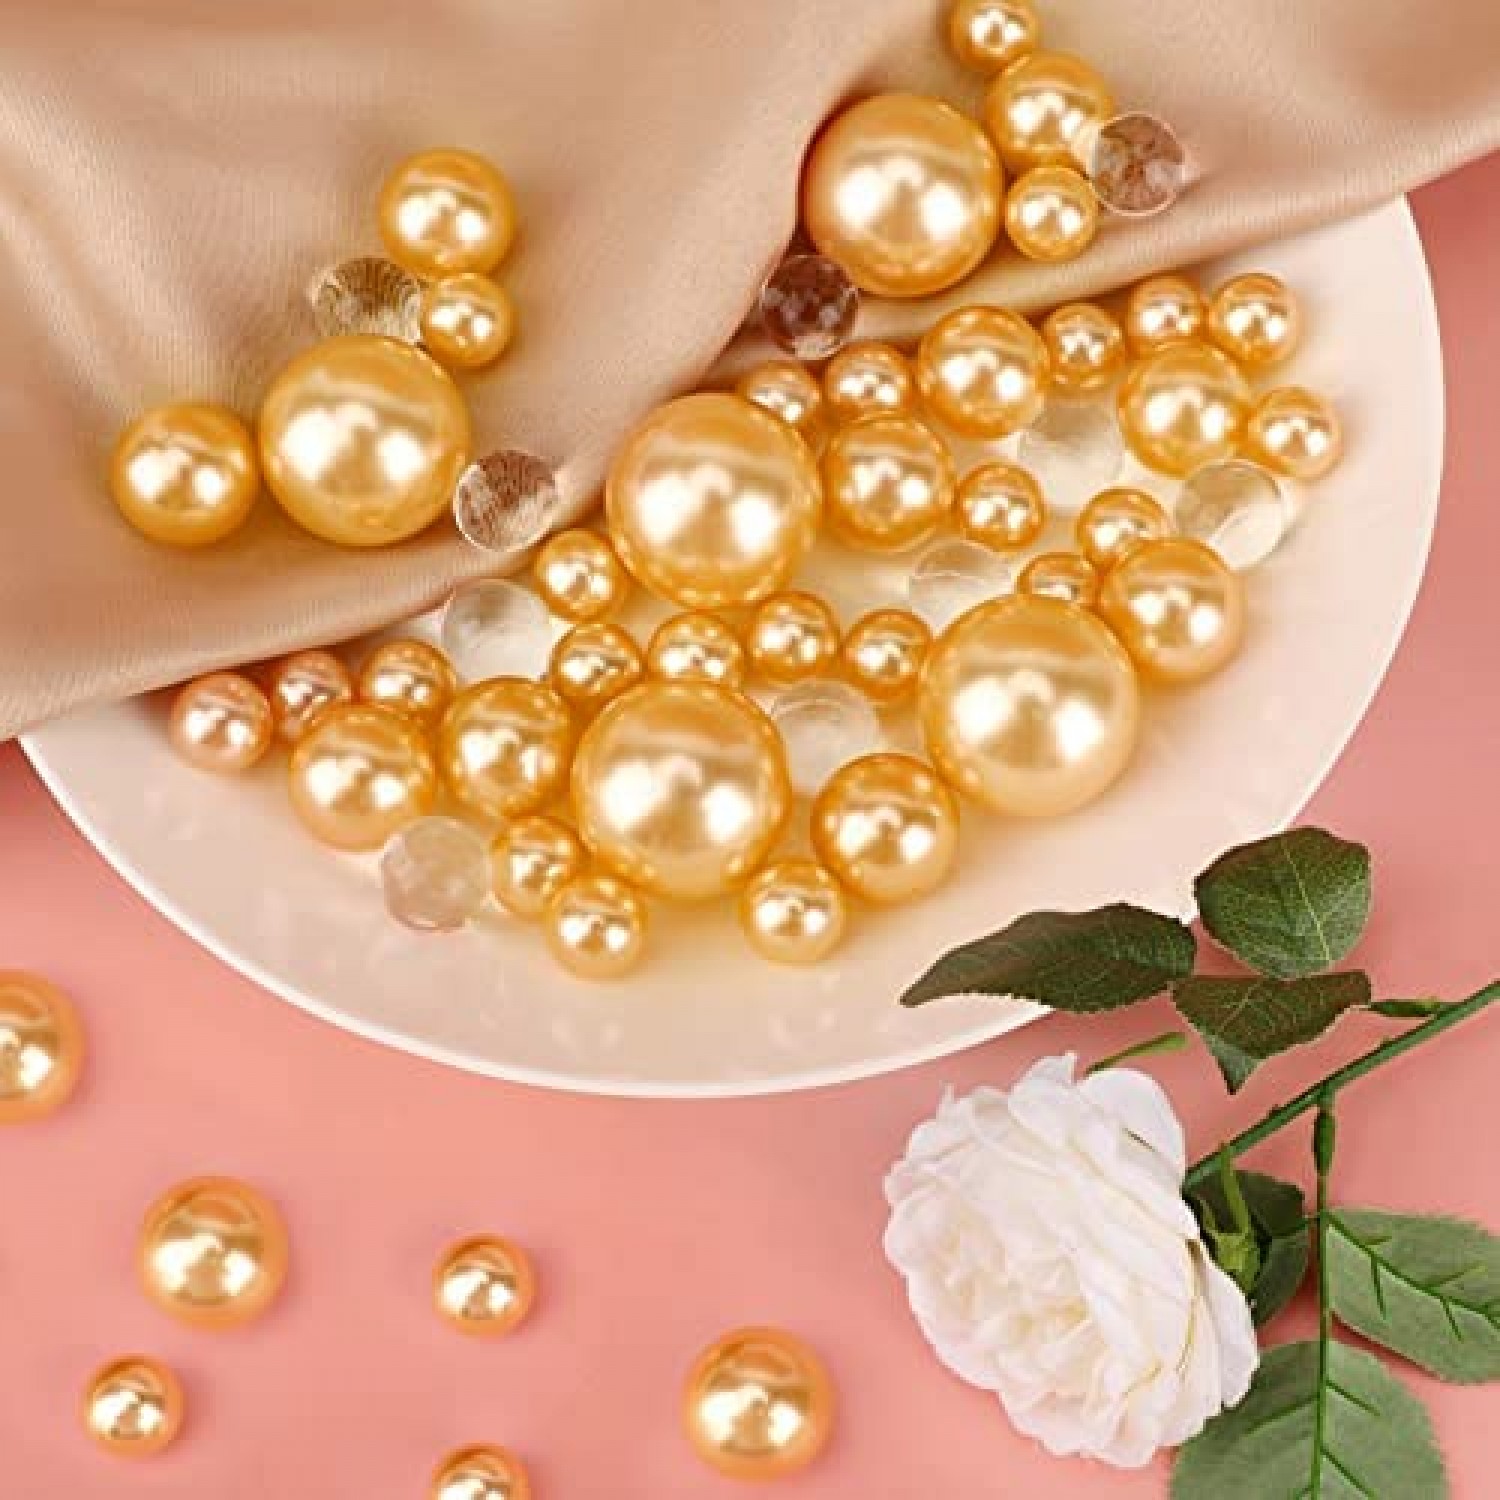 SUREAM Gold Assorted Floating Pearls, 100PCS Art Faux Pearls and 2300PCS  Water Gel Beads, Imitation Round